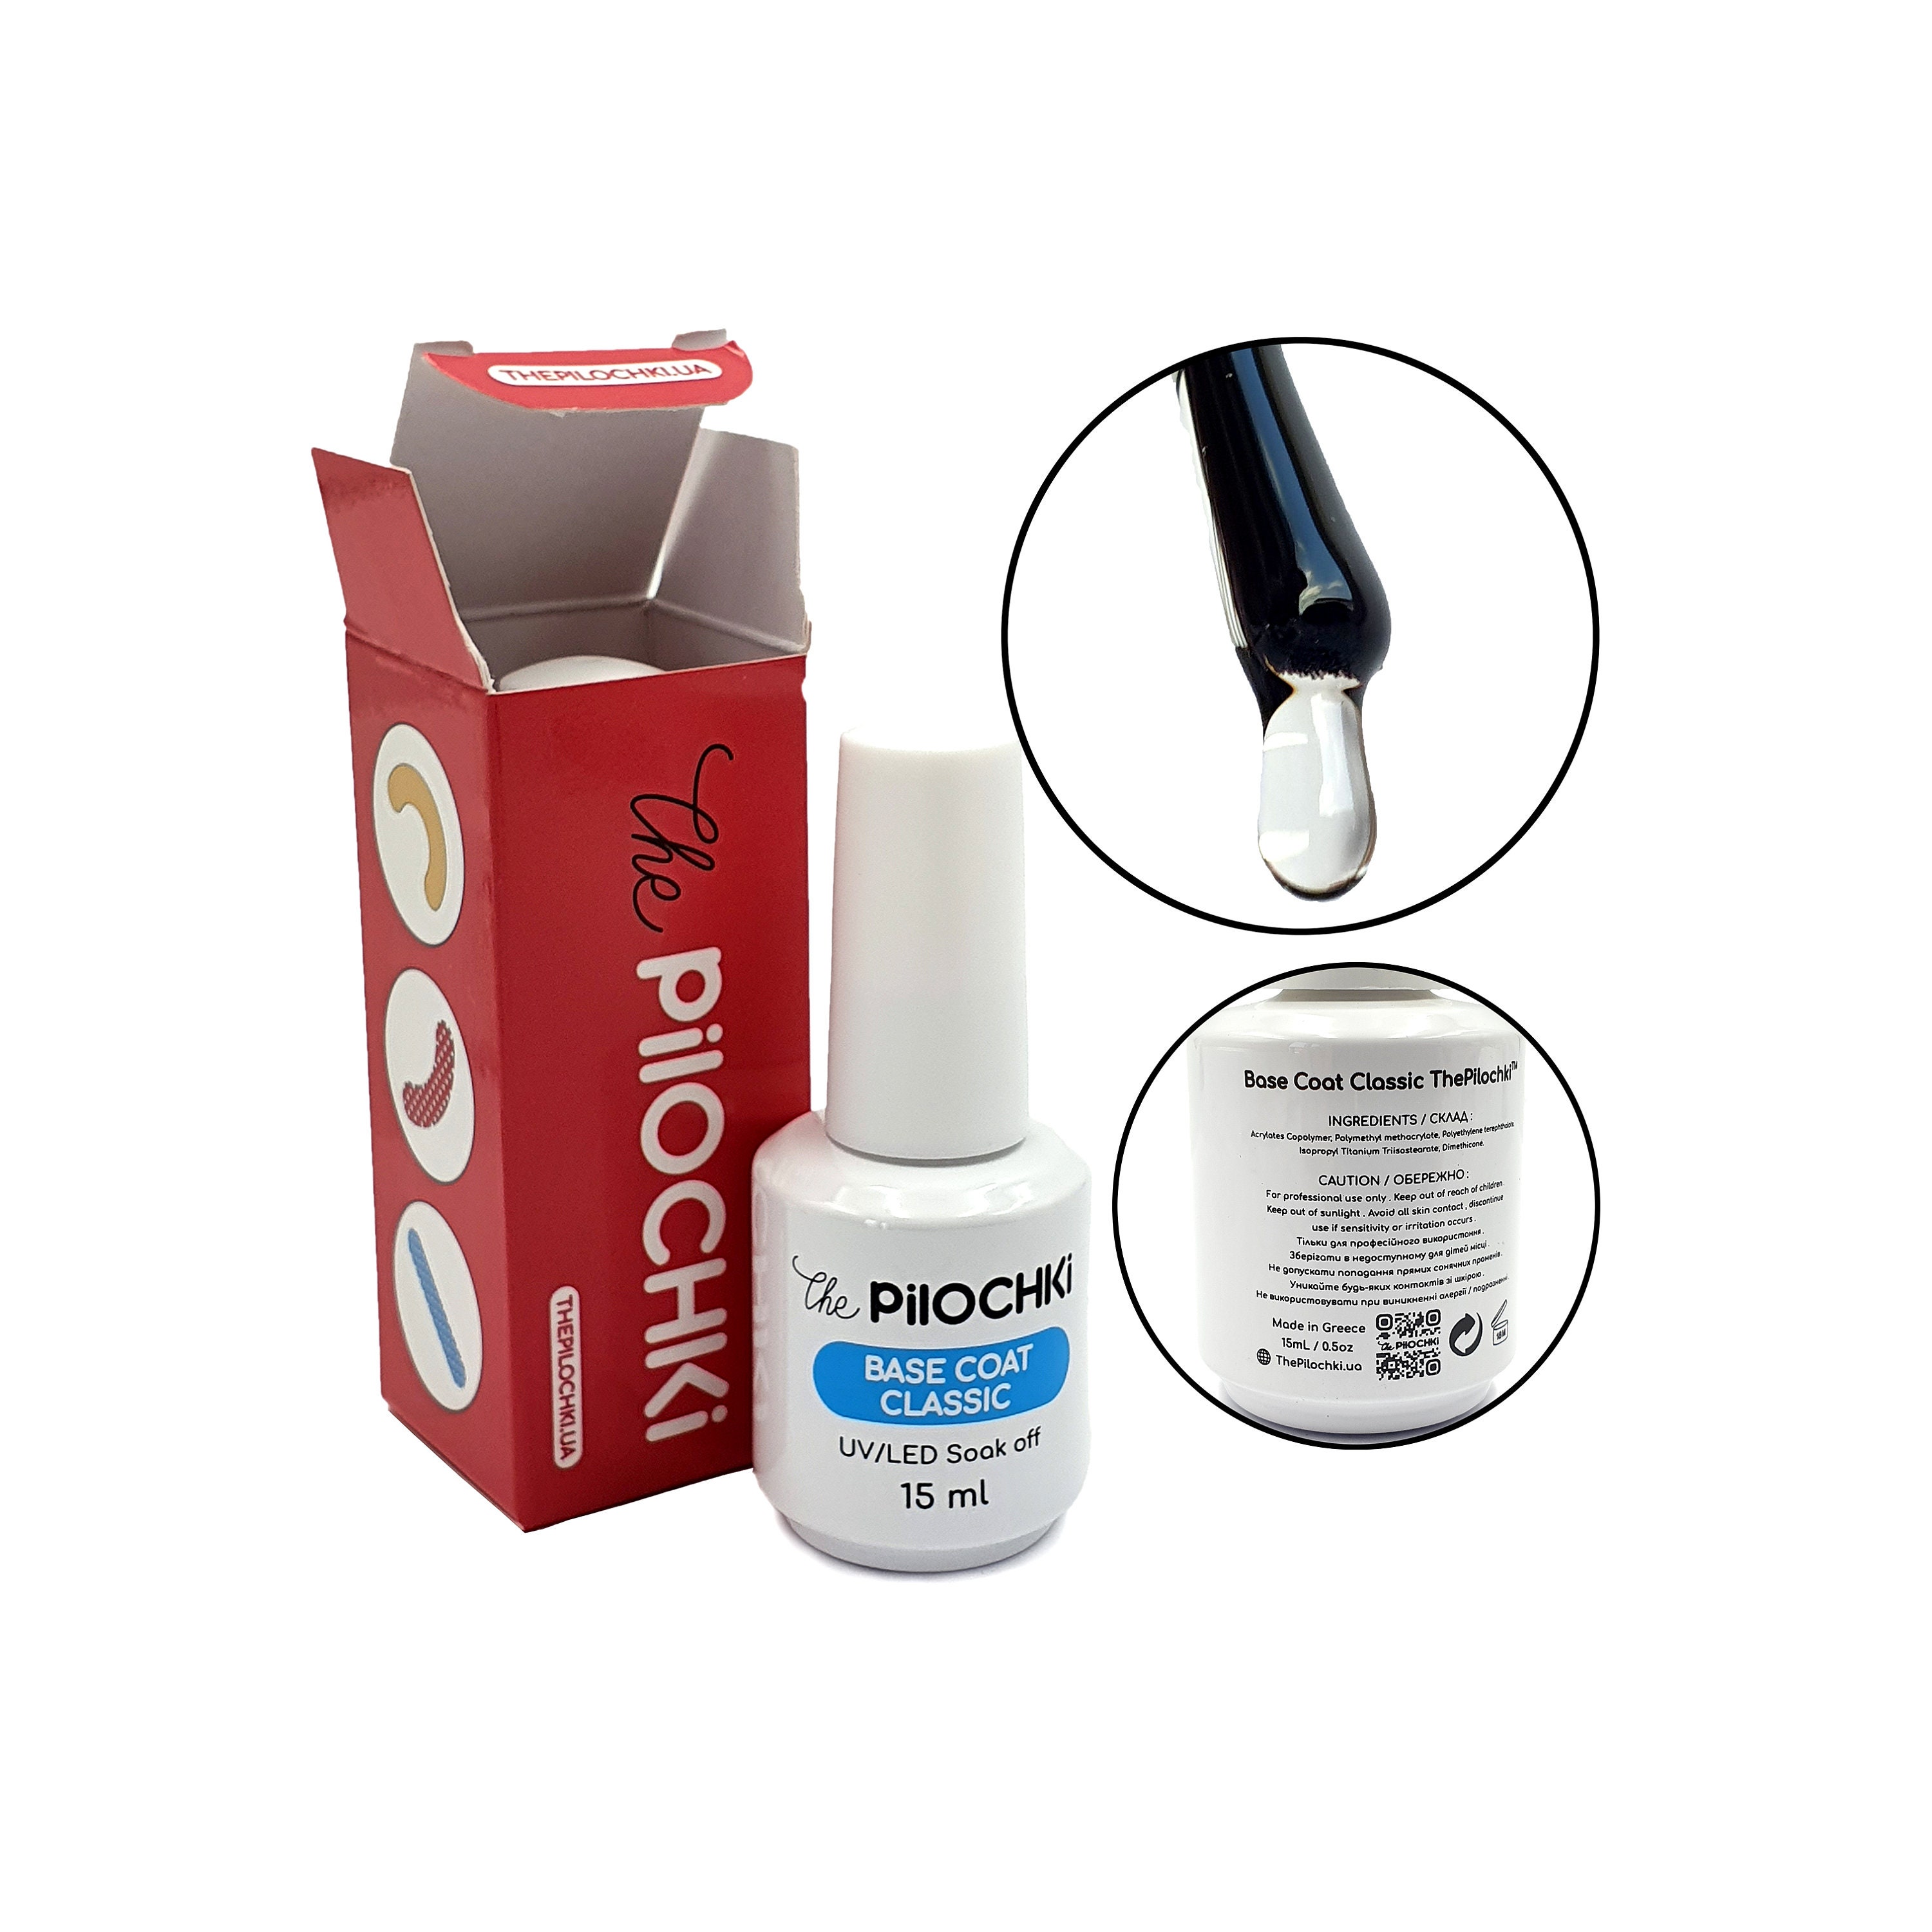 Save over 20% off TopCoat® Spritz® - Top Coat Products